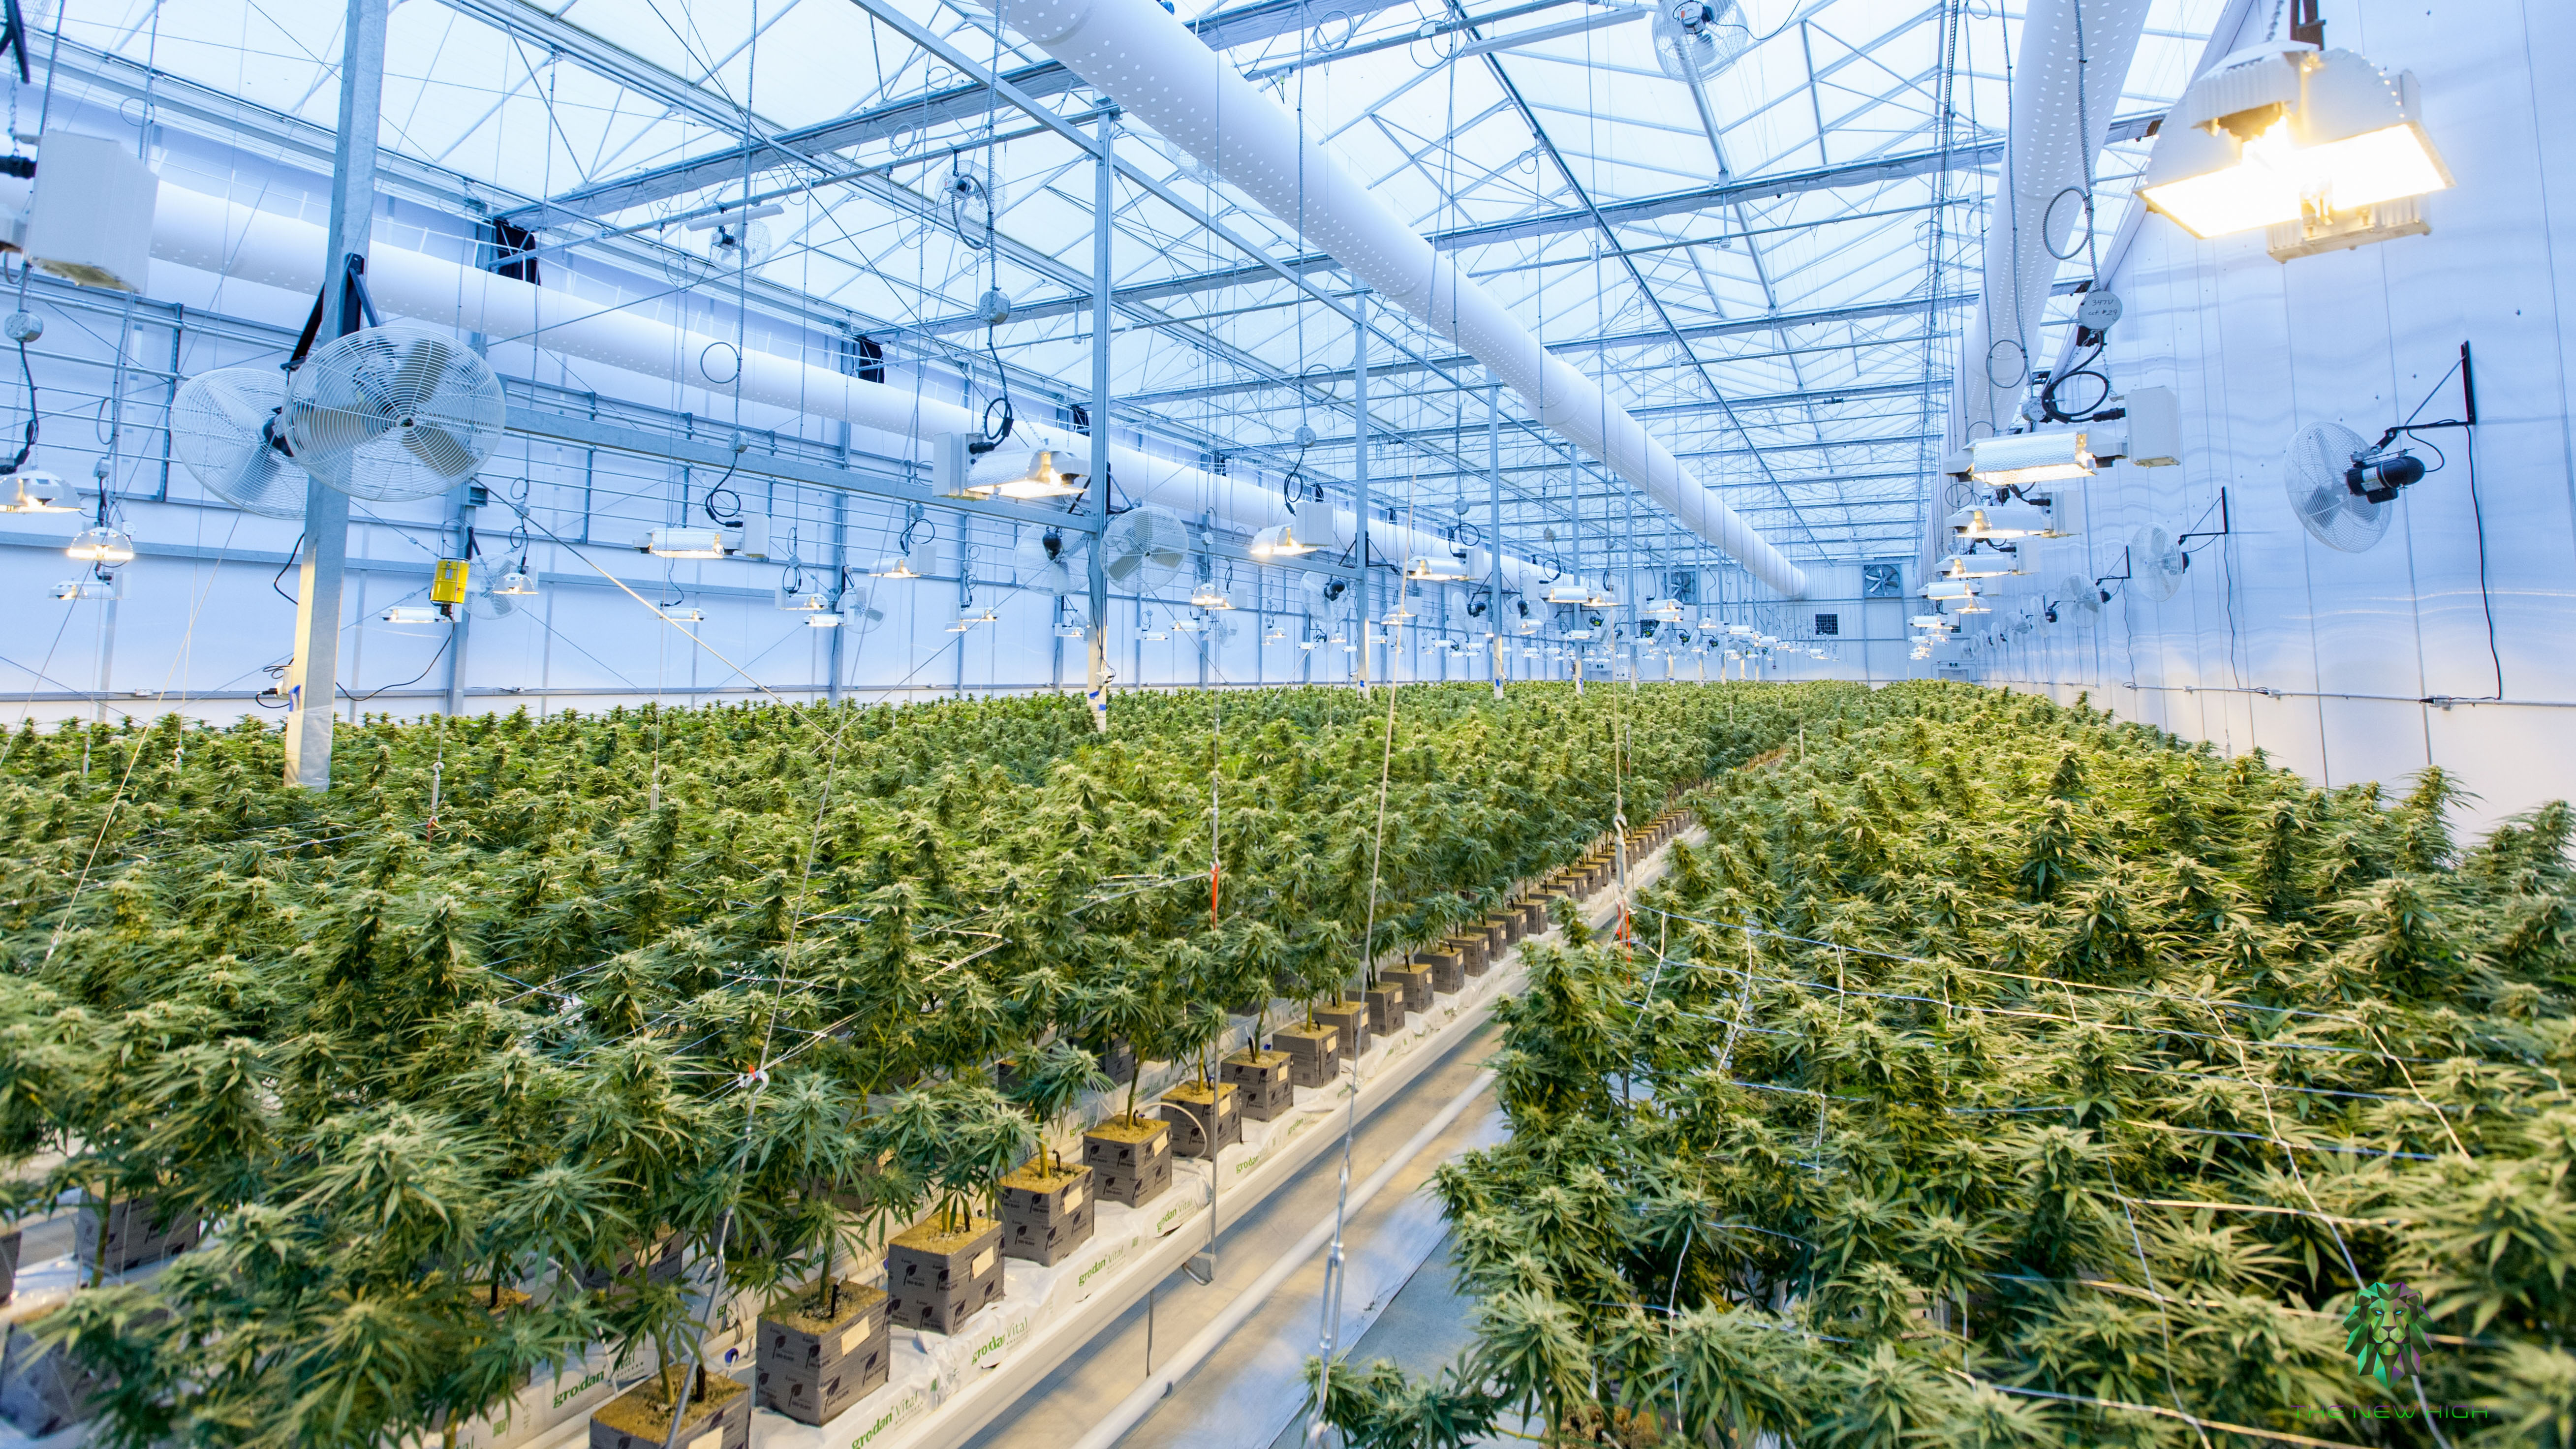 Cannabis growing warehouse. Rows of cannabis plants under lights.